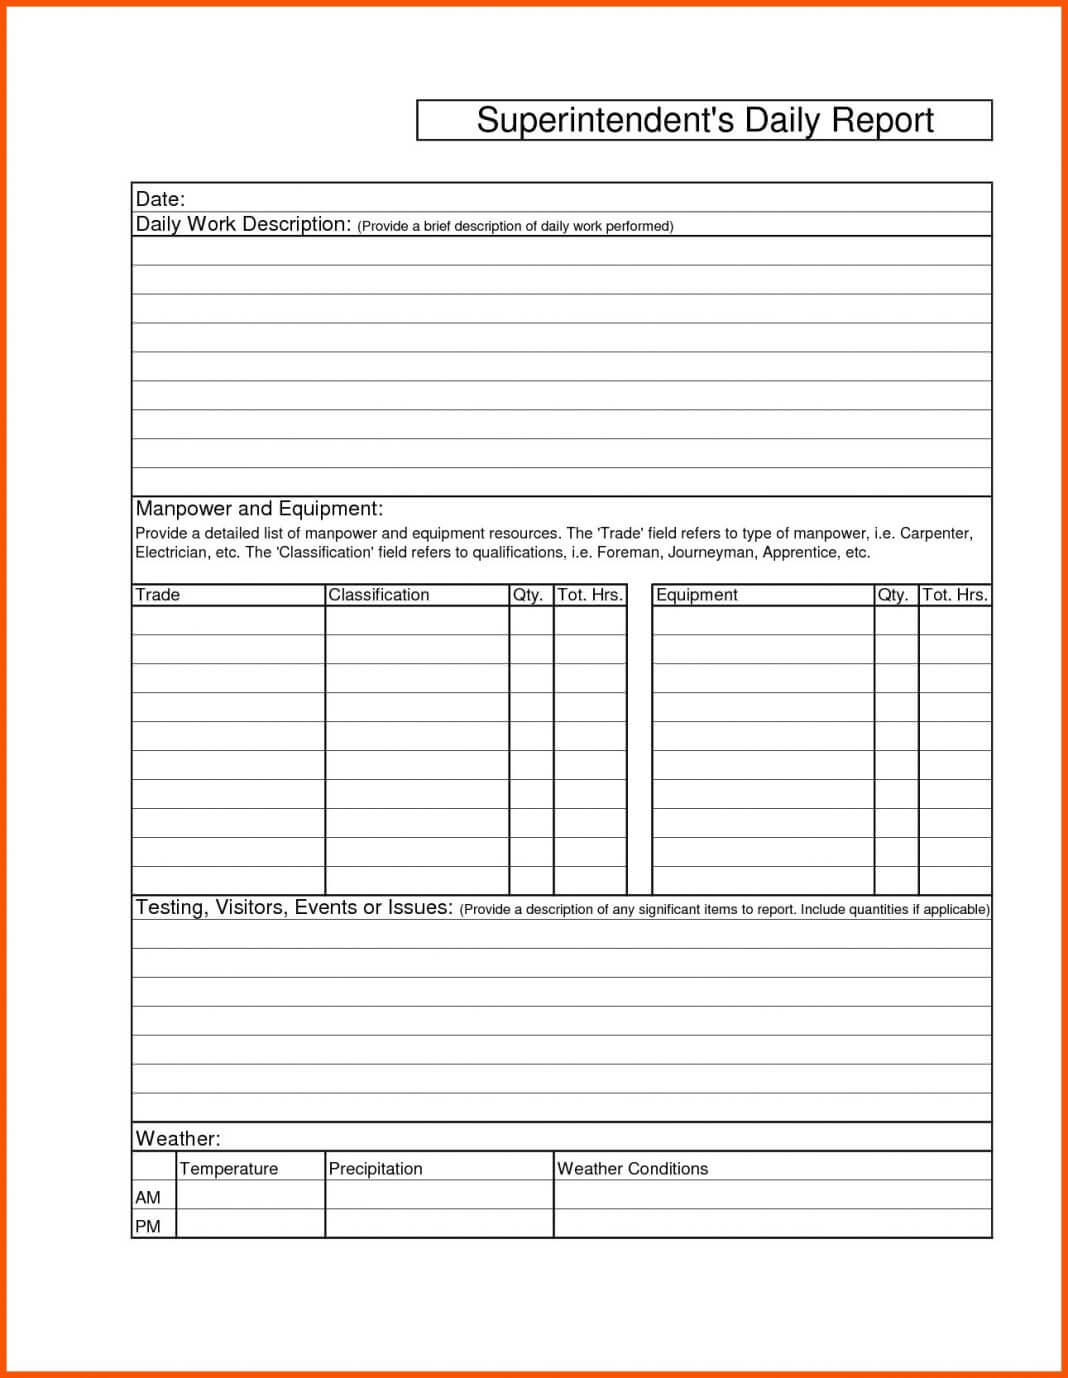 021 Daily Work Report Template Xls Ideas 20Daily Iwsp5 Inside Daily Work Report Template